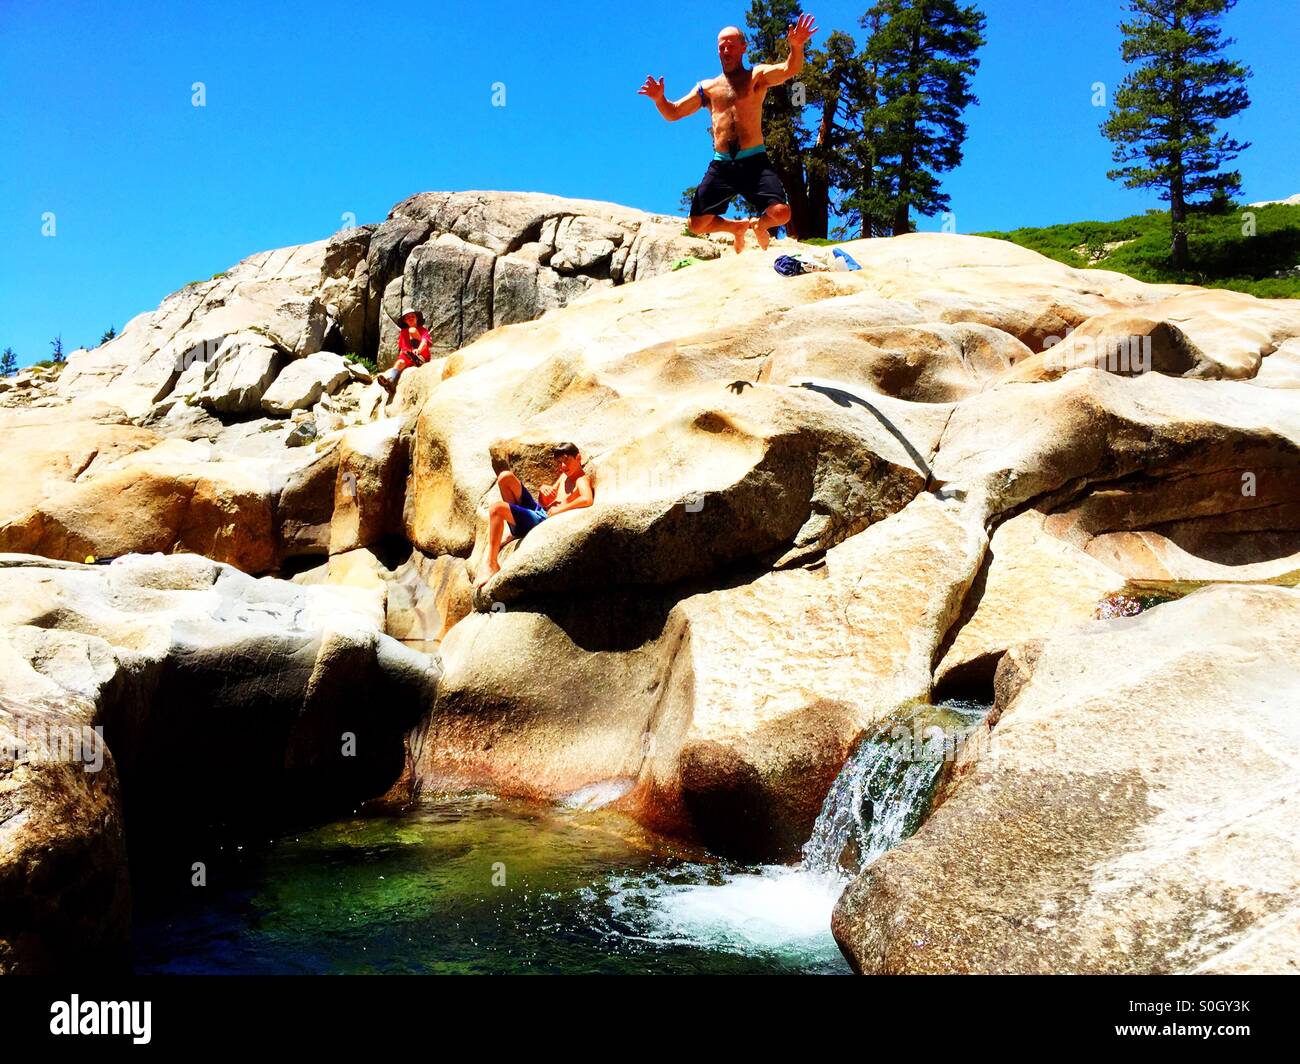 Summer adventures. Man jumps from high rock ledge into cool spring pool below. Stock Photo